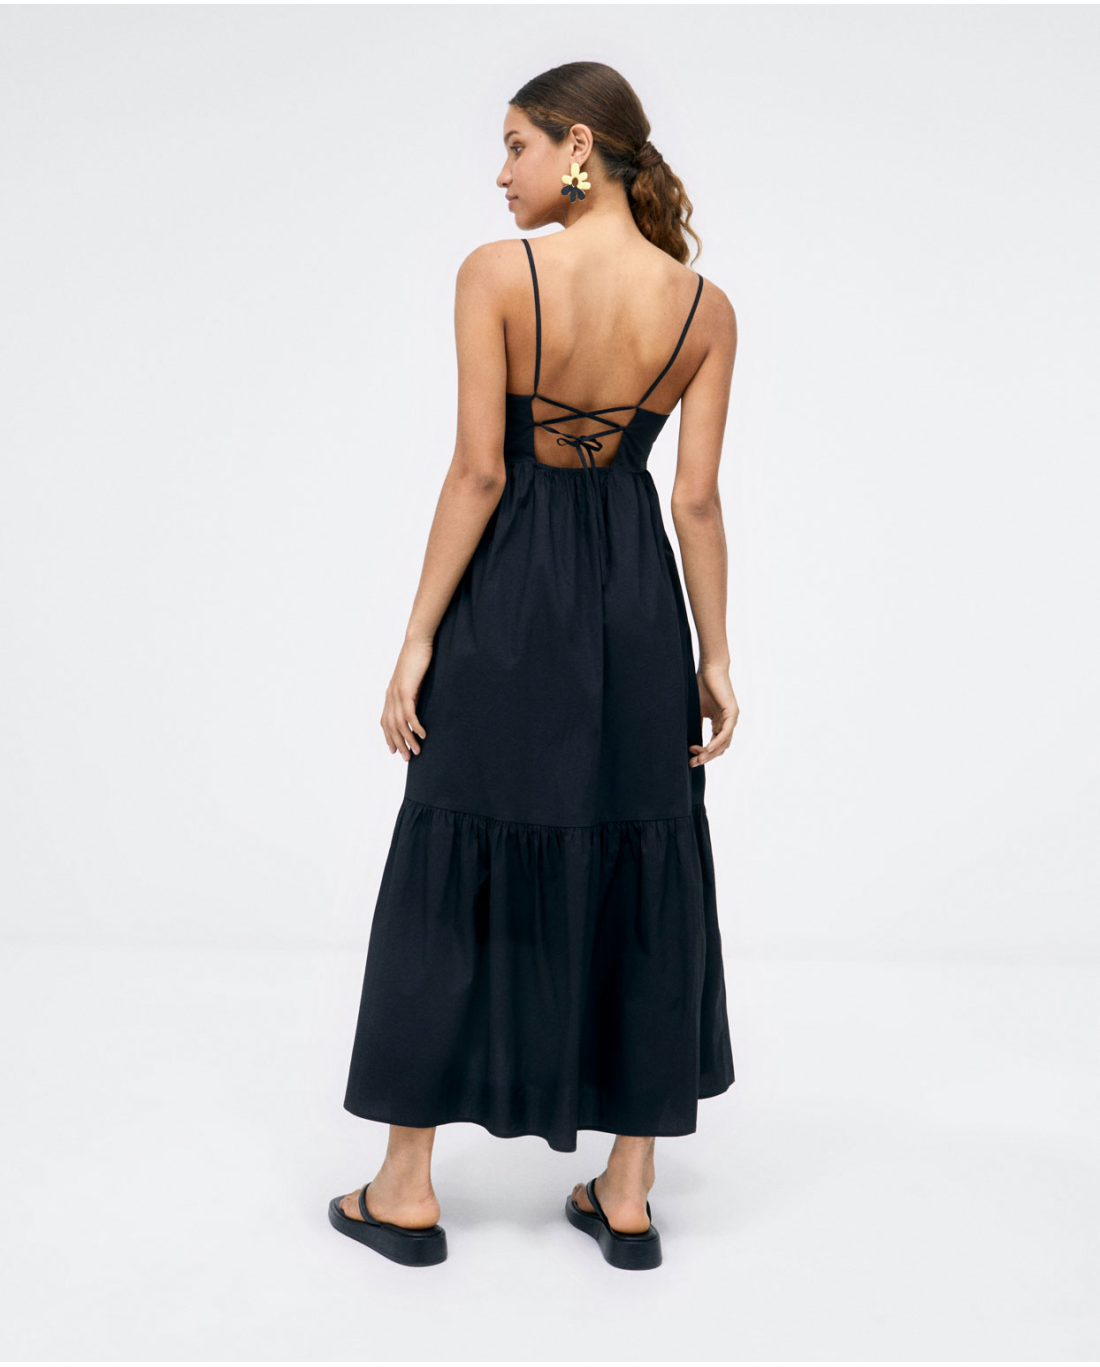 Long dress with straps and ruffle. Plain Black Color Black Sizes XS